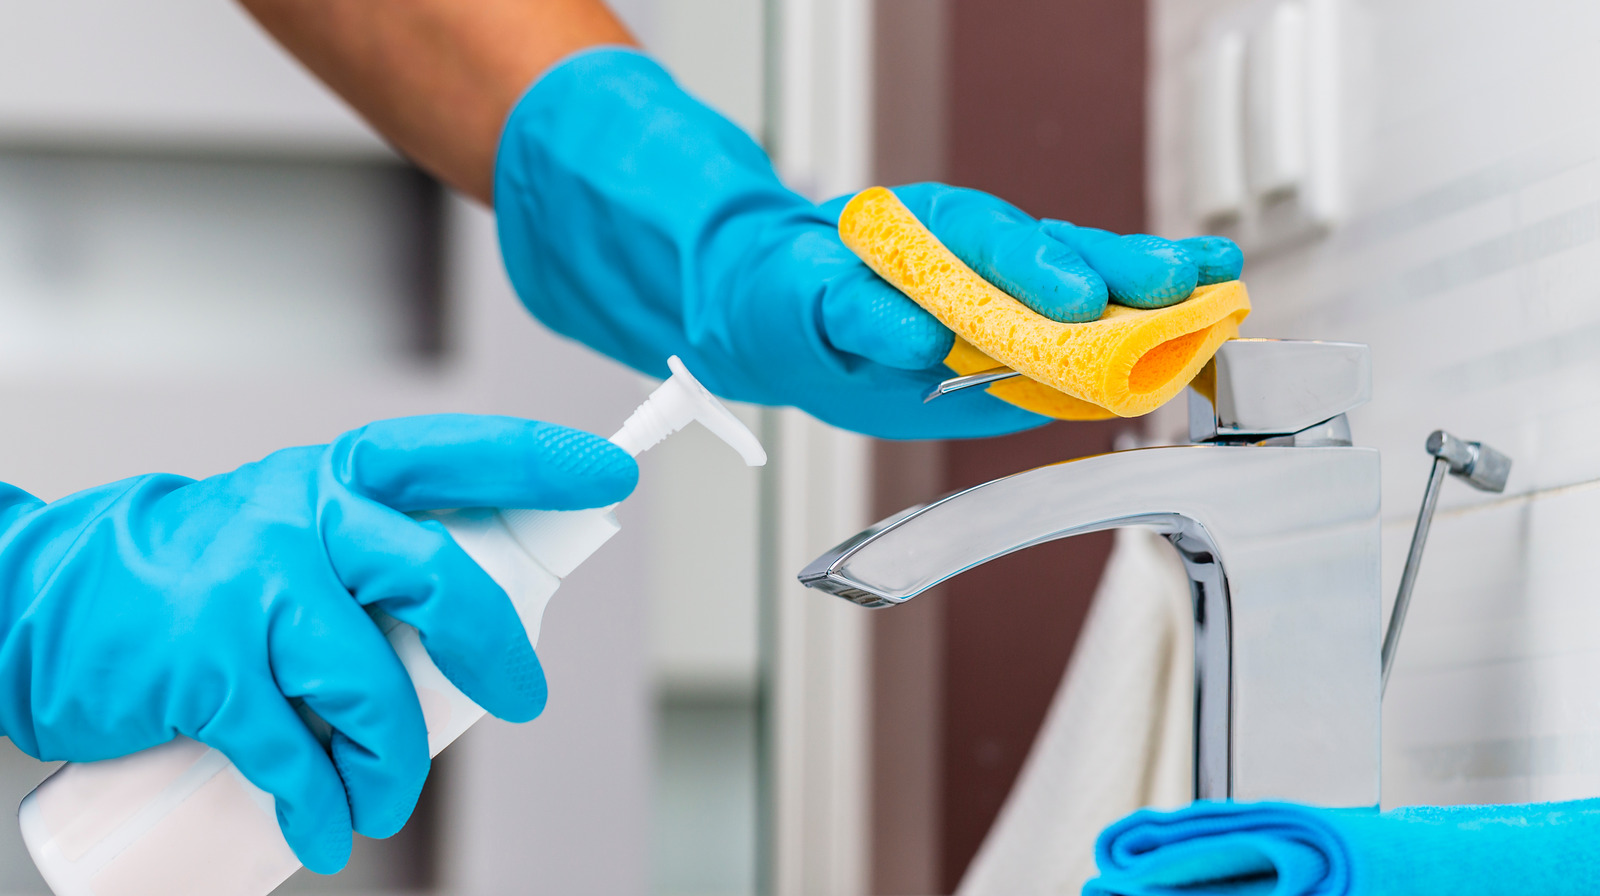 How To Clean Your Bathroom In 30 Minutes Or Less, According To An Expert